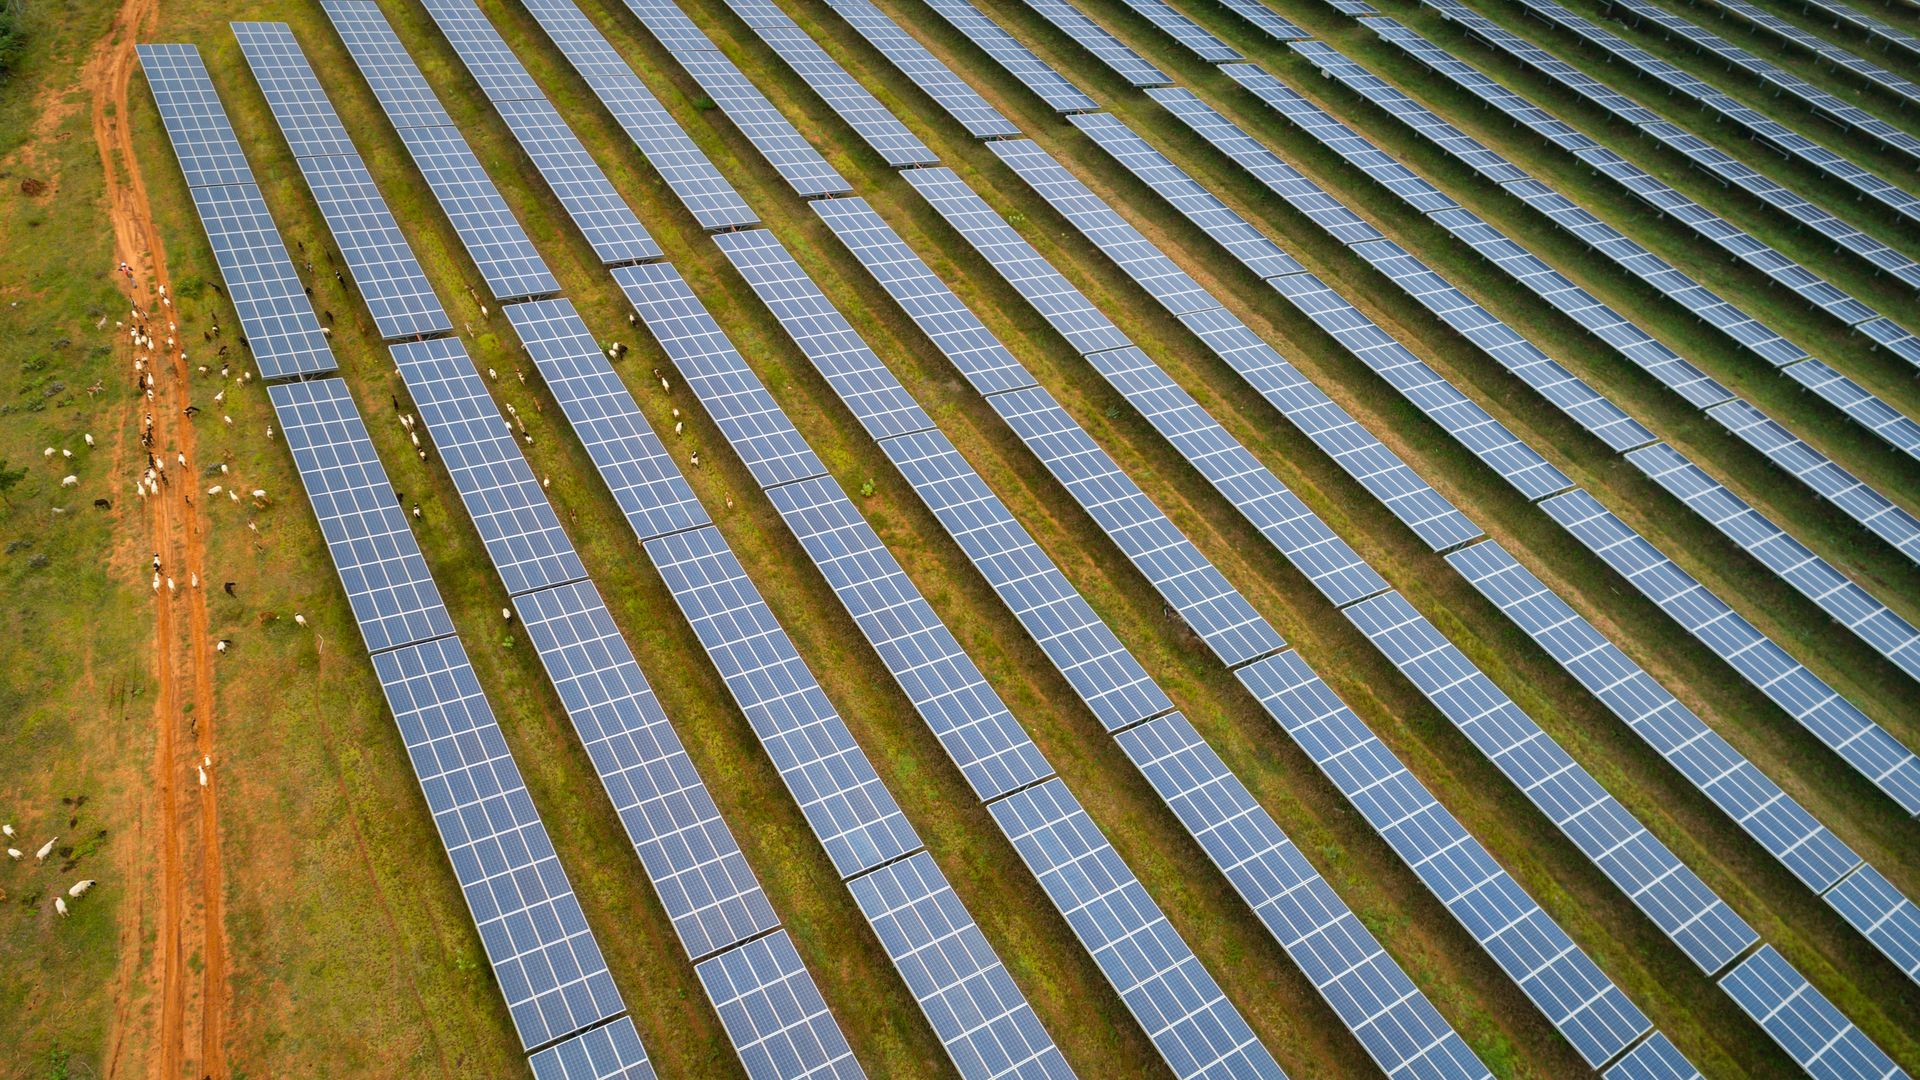 An aerial view shows sheep grazing next to photovoltaic cell solar panels in the Pavagada Solar Park on October 09, 2021 in Thirumani village, Karnataka, India.